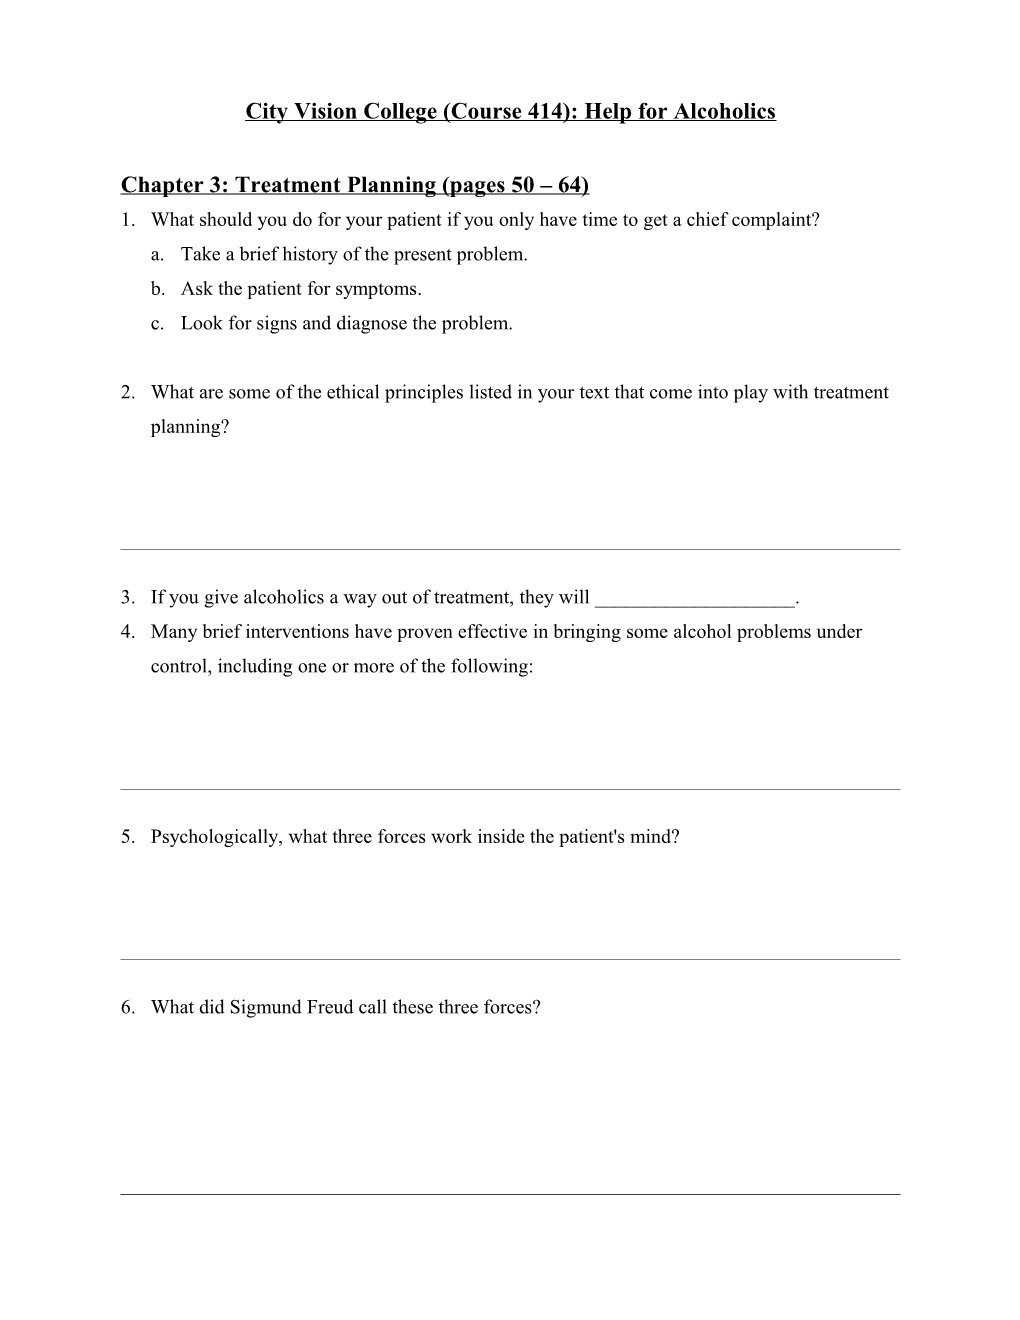 Chapter 3: Treatment Planning (Pages 50 64)